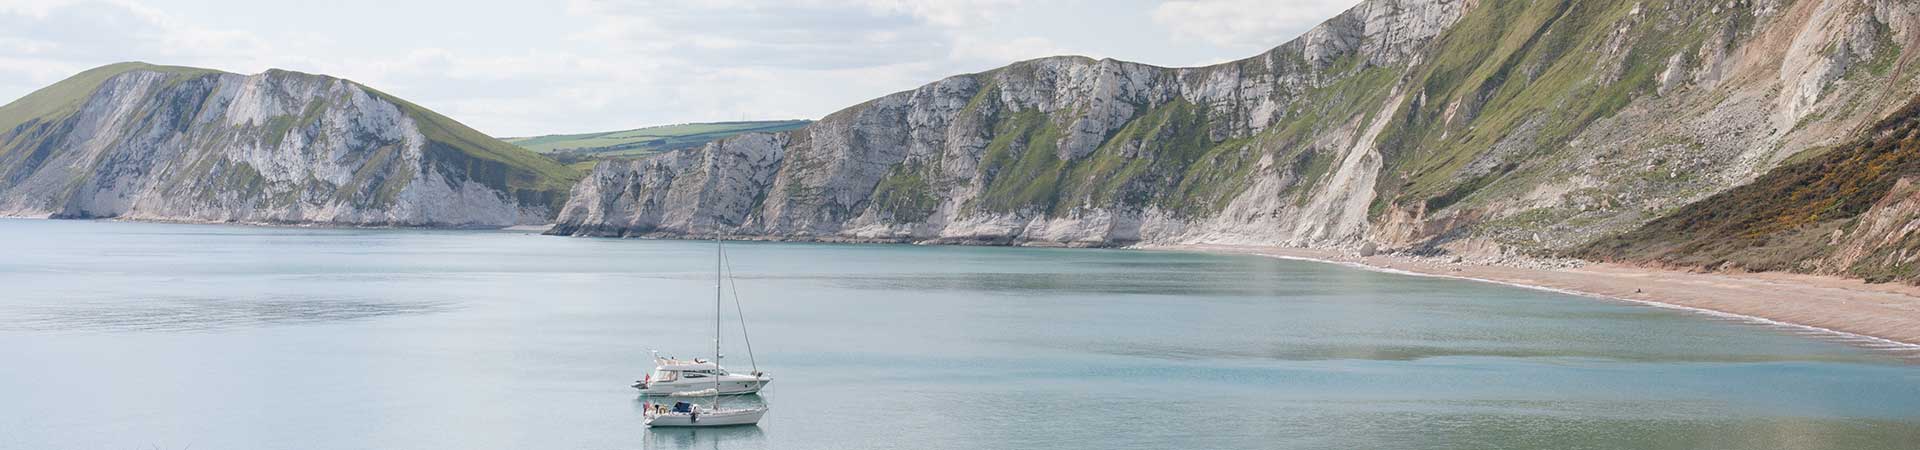 Holidays on the Isle of Purbeck